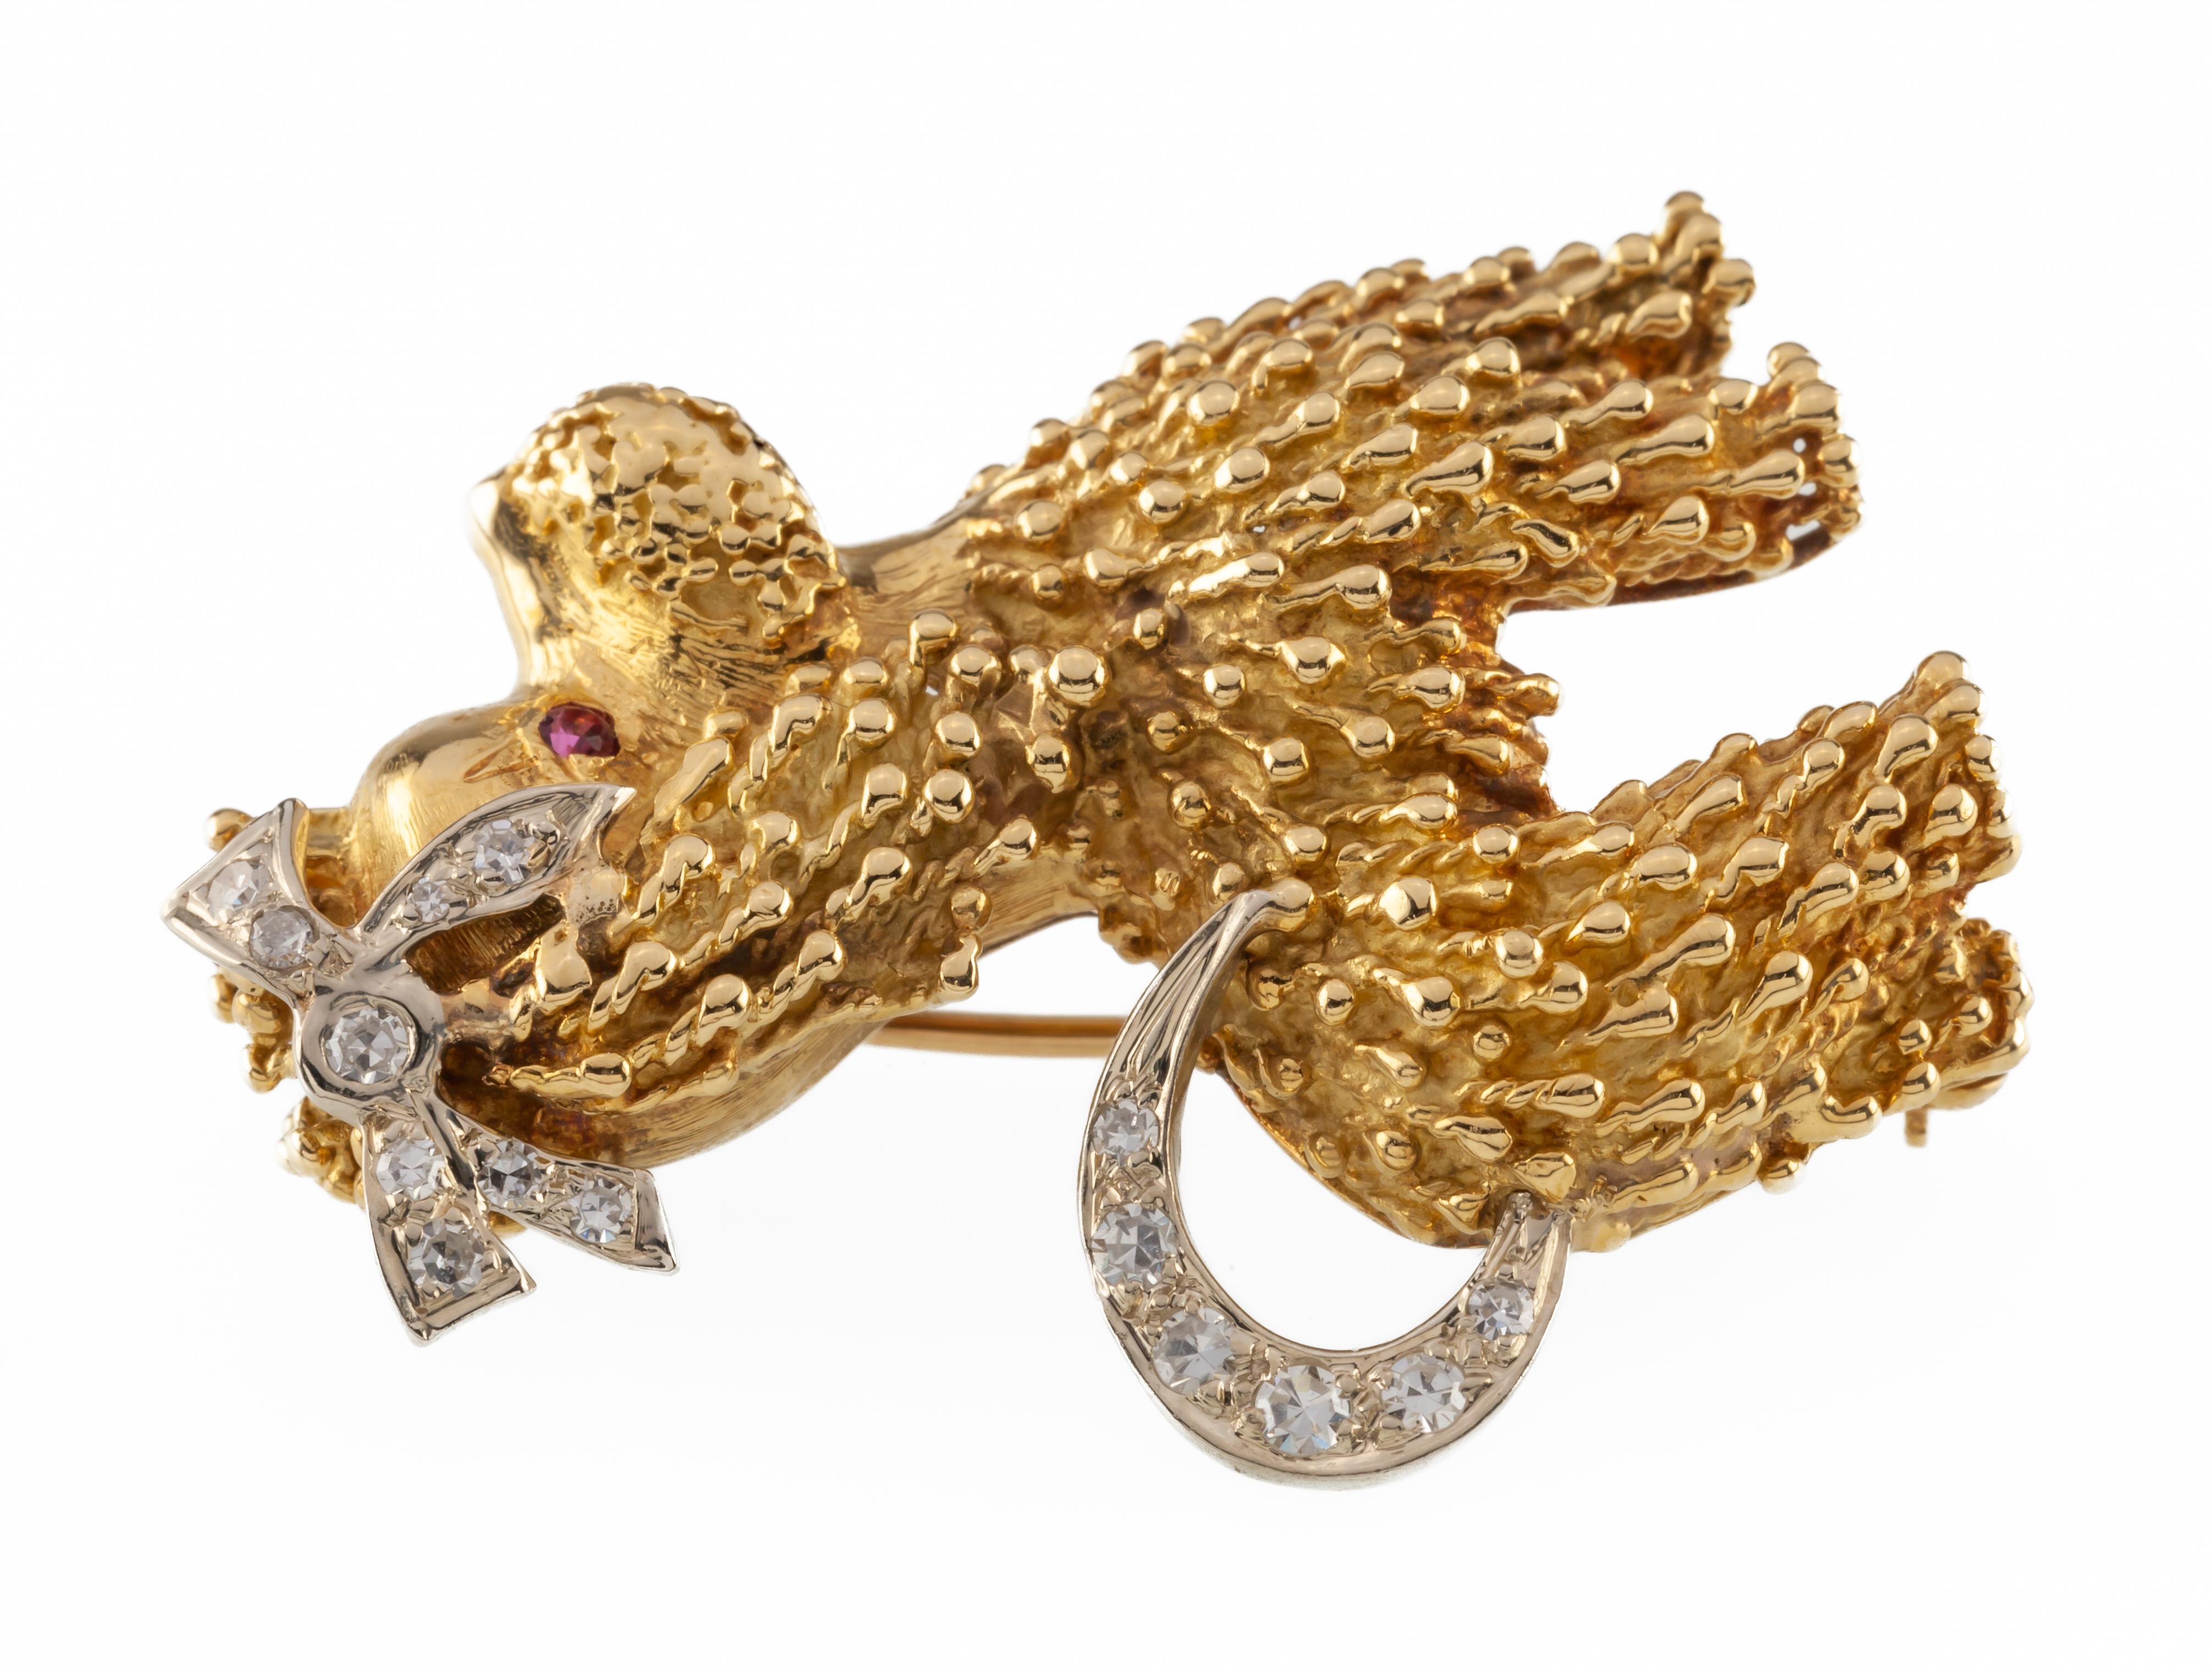 18k Yellow Gold Poodle Brooch Featuring Diamond & Ruby Accents with Certificate For Sale 1